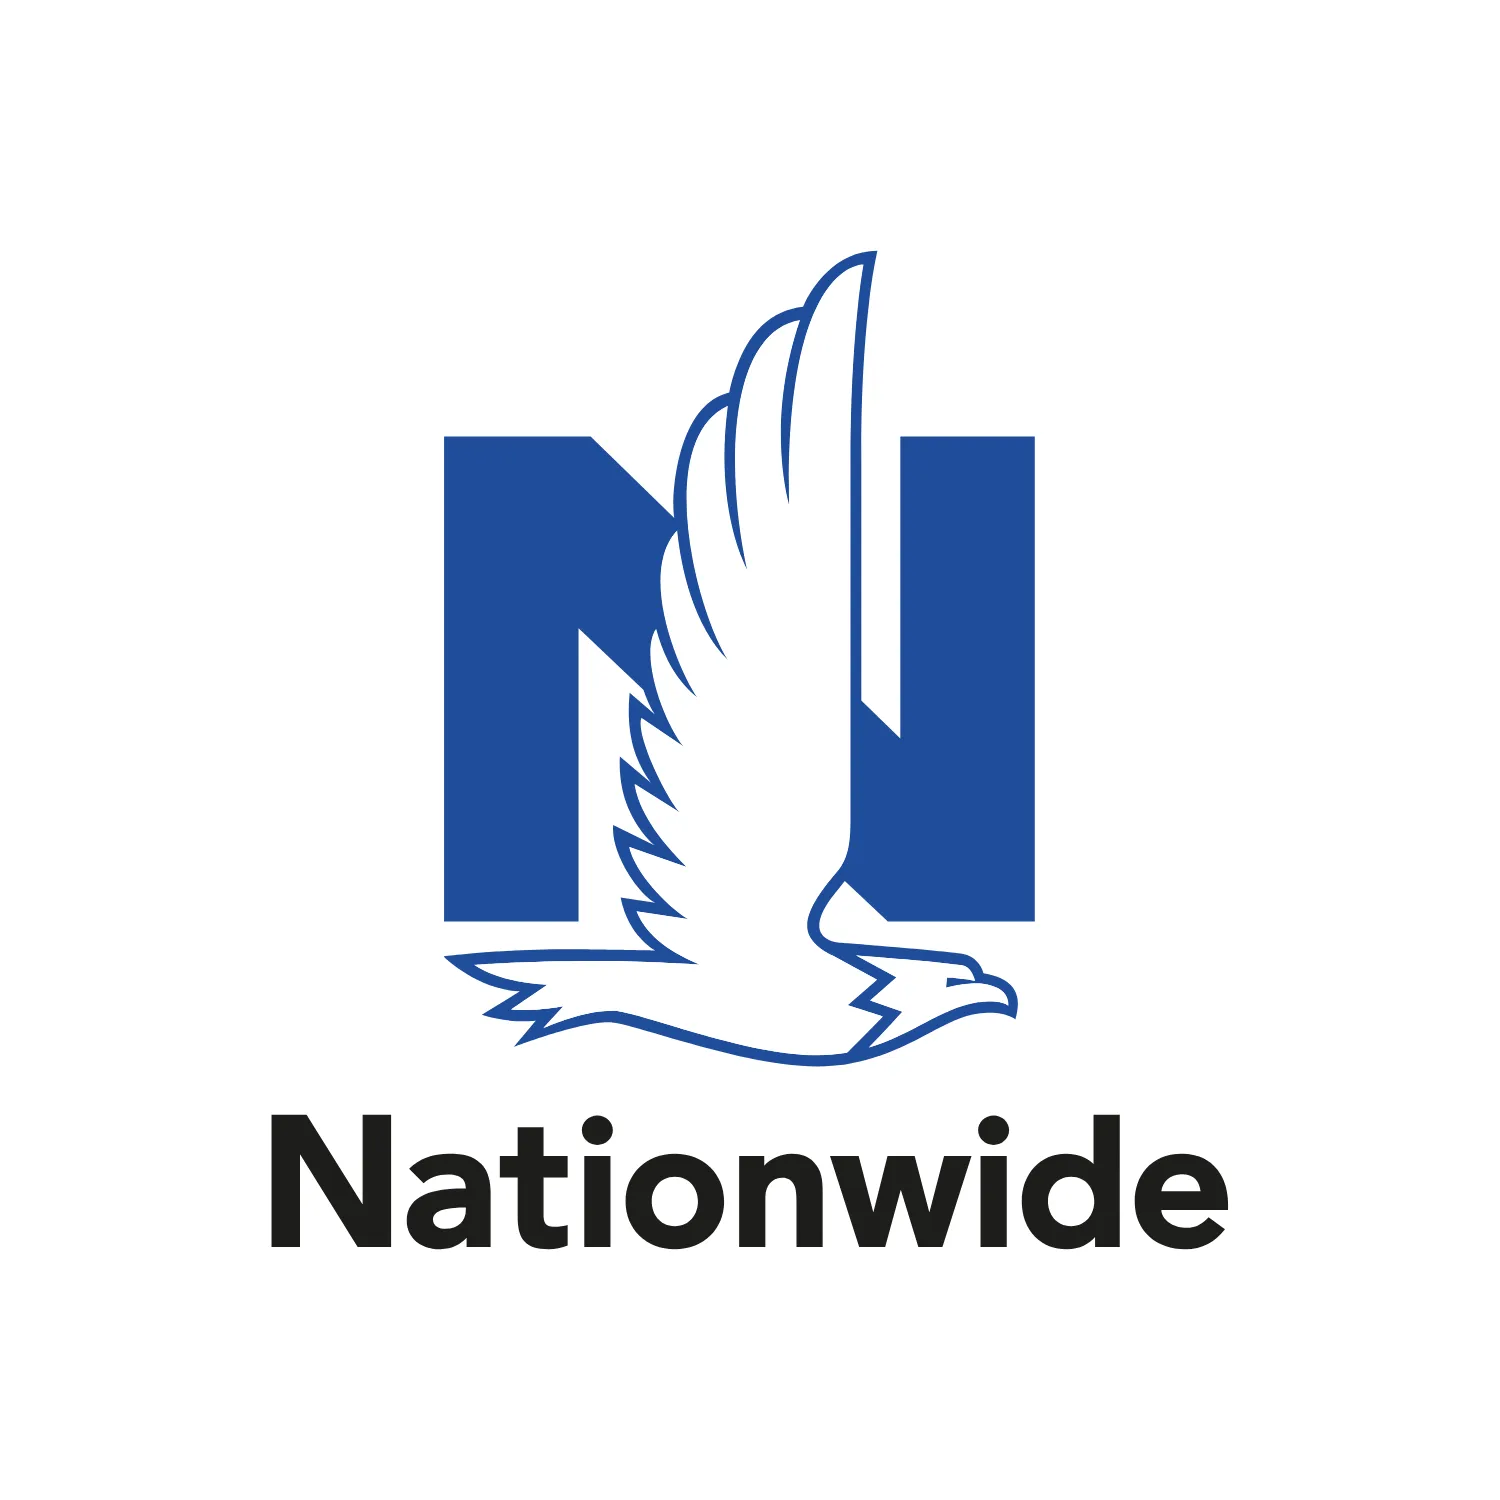 Database of Nationwide Insurance Agents Locations in the United States